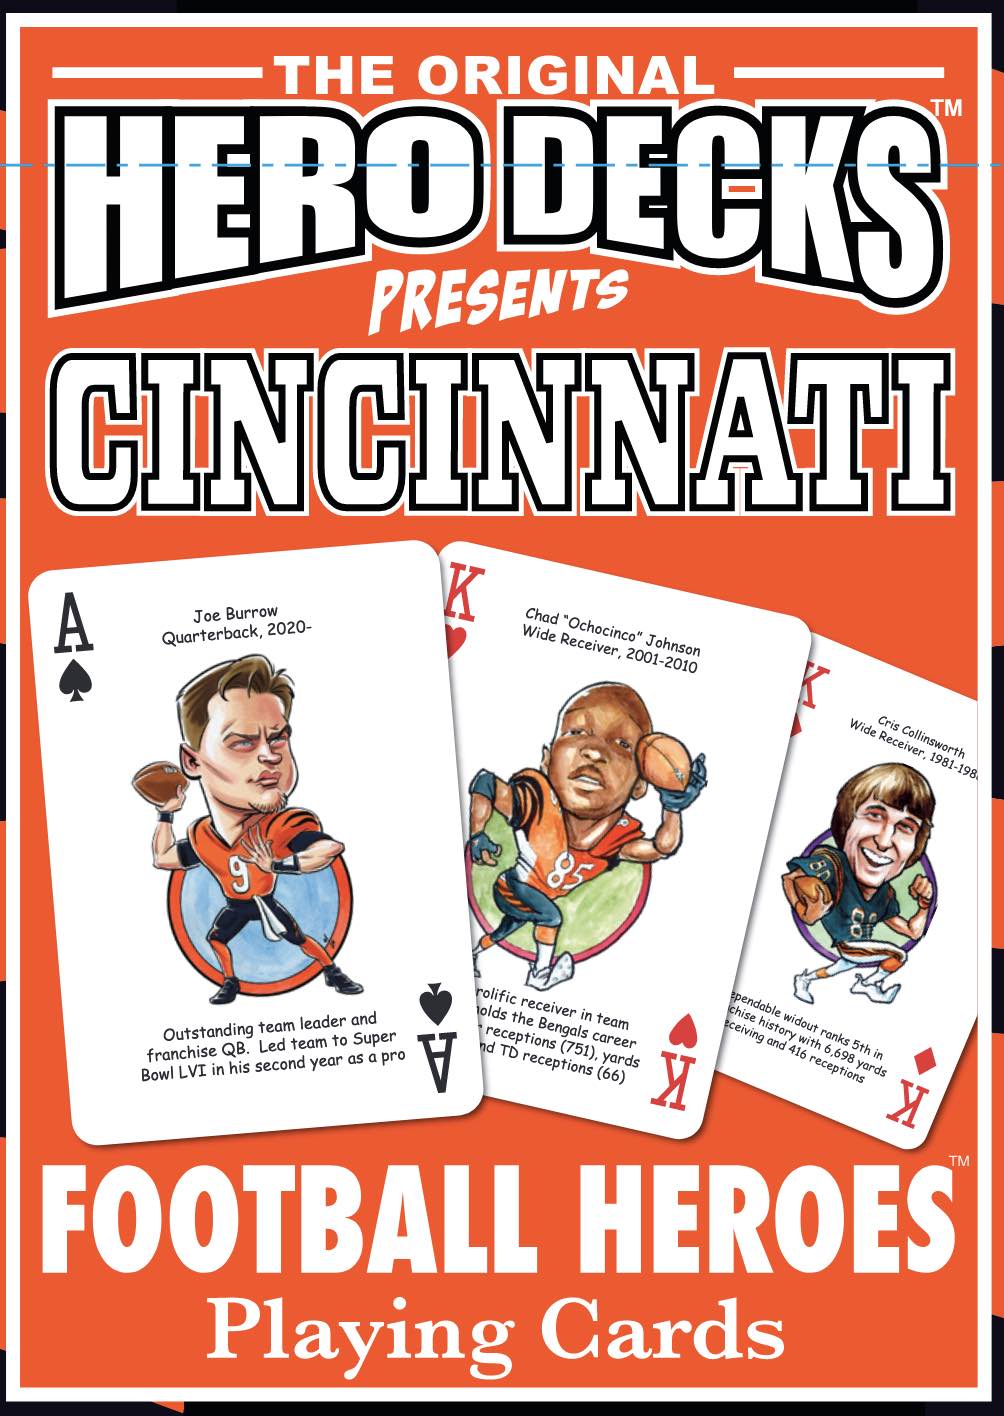 Cincinnati Football Heroes - Playing Cards for Bengals Fans (3rd Edition)